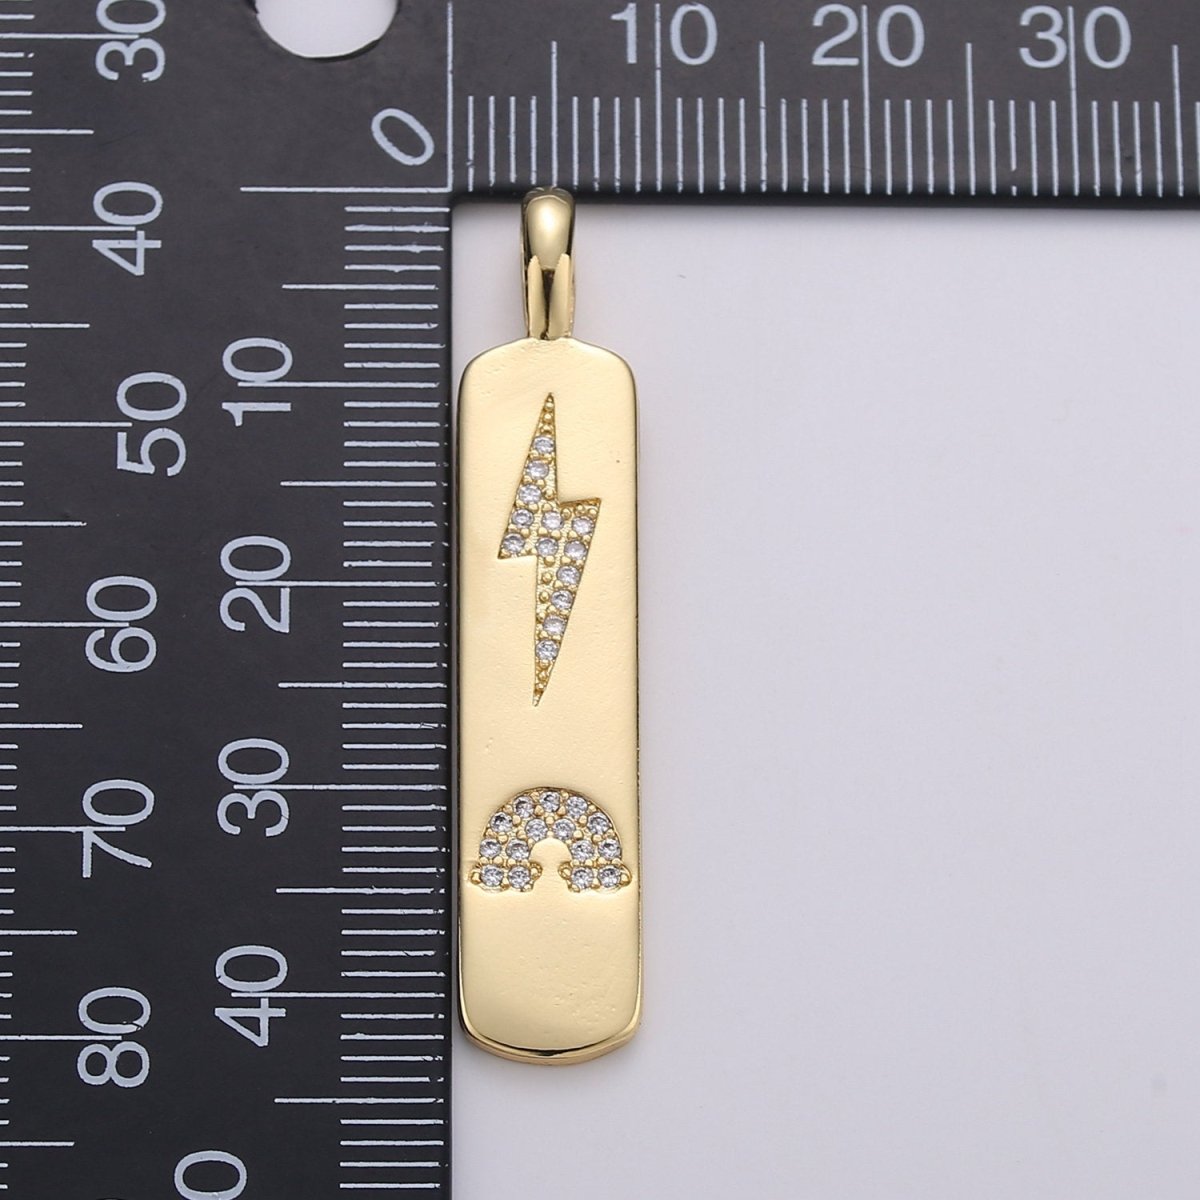 Micro Pave Bolt Charm Rectangle Tag in 14k Gold Filled Drop Pendant Long Celstial Charm for Necklace Component I-705 - DLUXCA